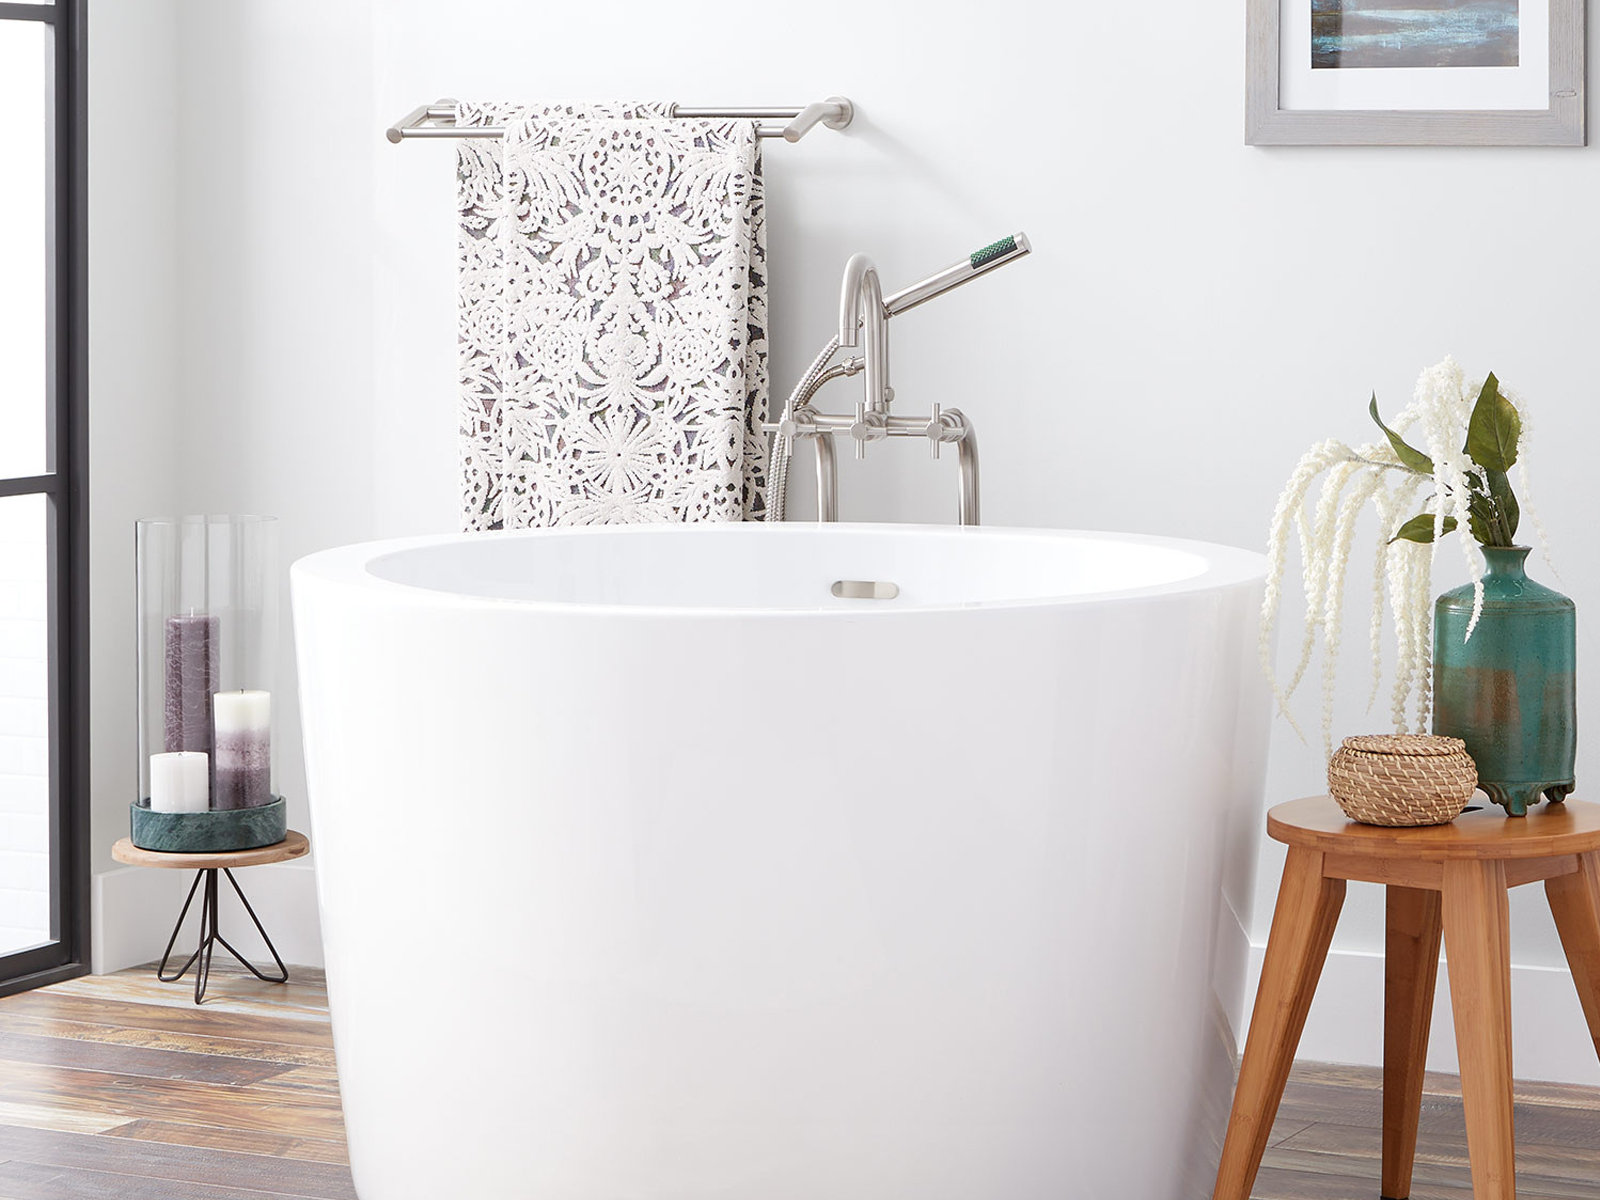 Cherie-Barber_Renovating-For-Profit_Small-Bathrooms-compact-bathtub